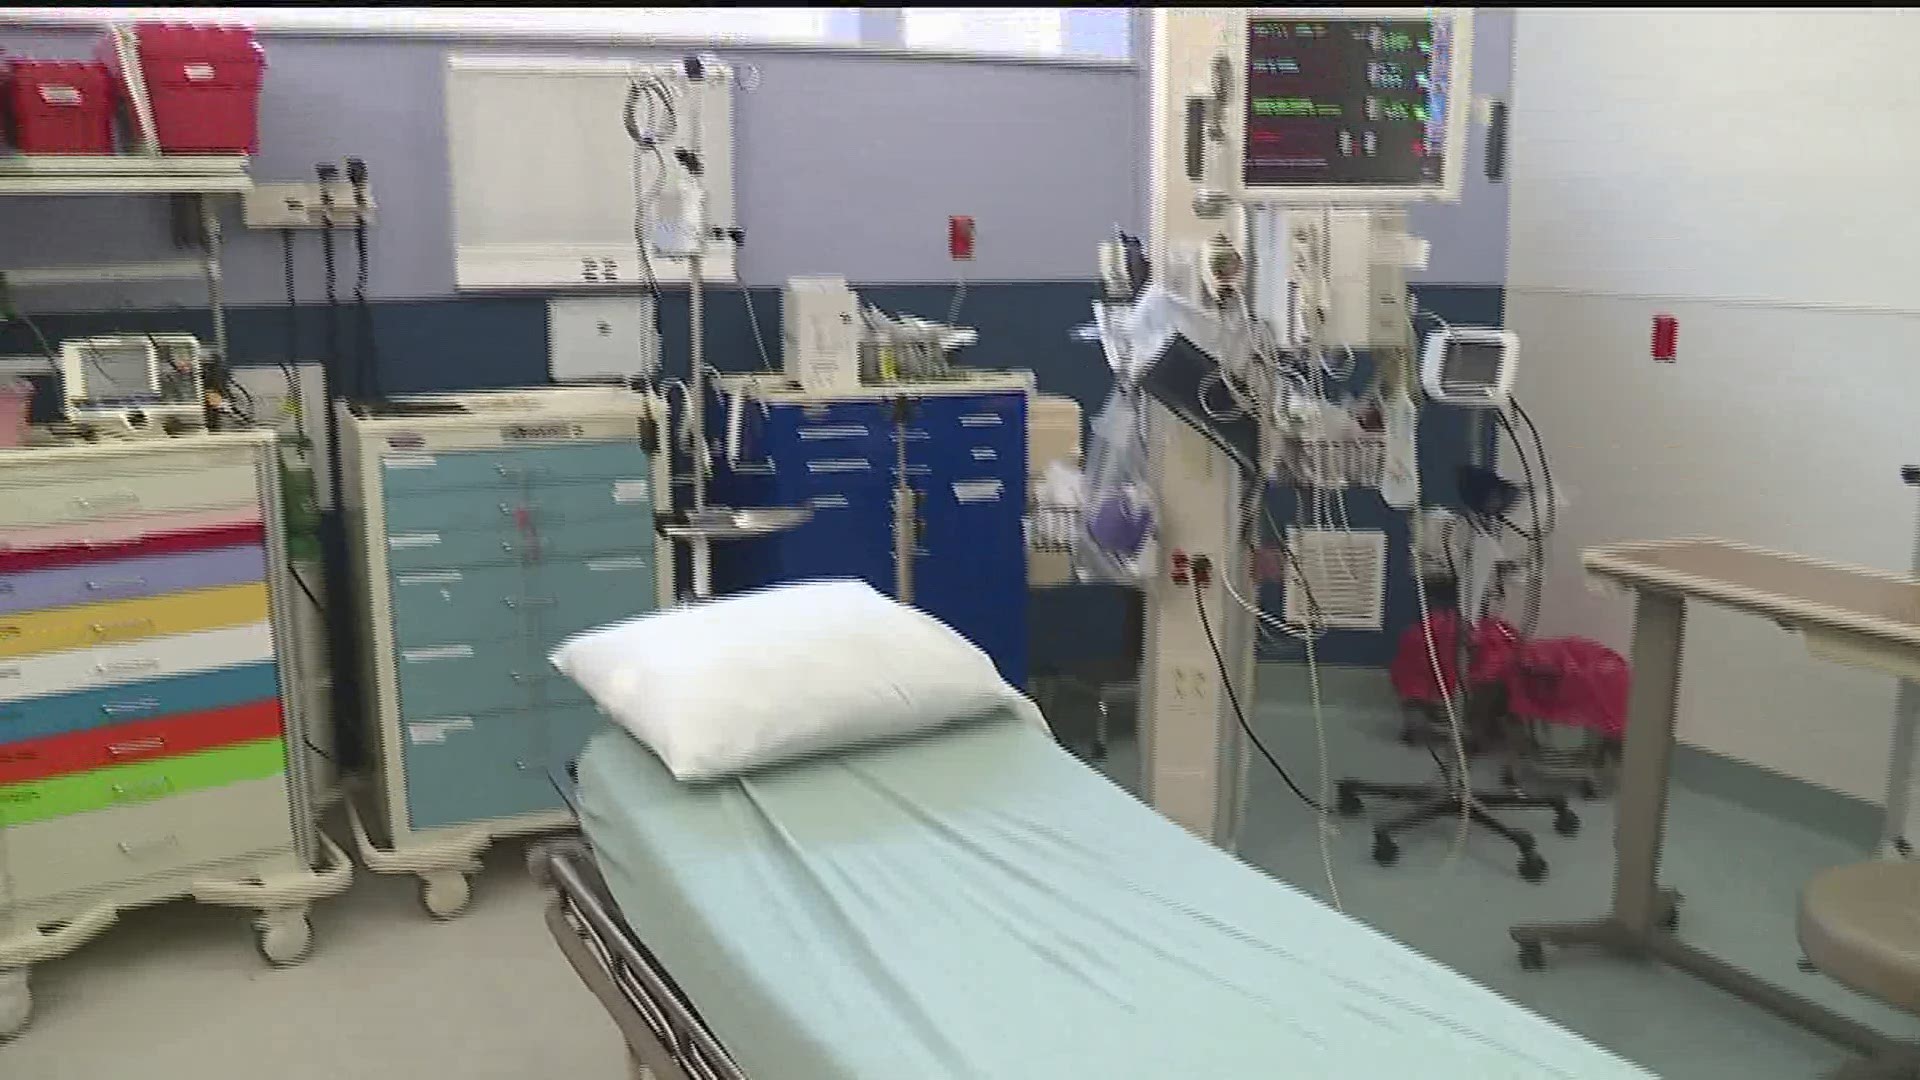 FOX43 asked state officials and local hospitals for specifics on the numbers of beds, ventilators, and mask currently available to patients statewide